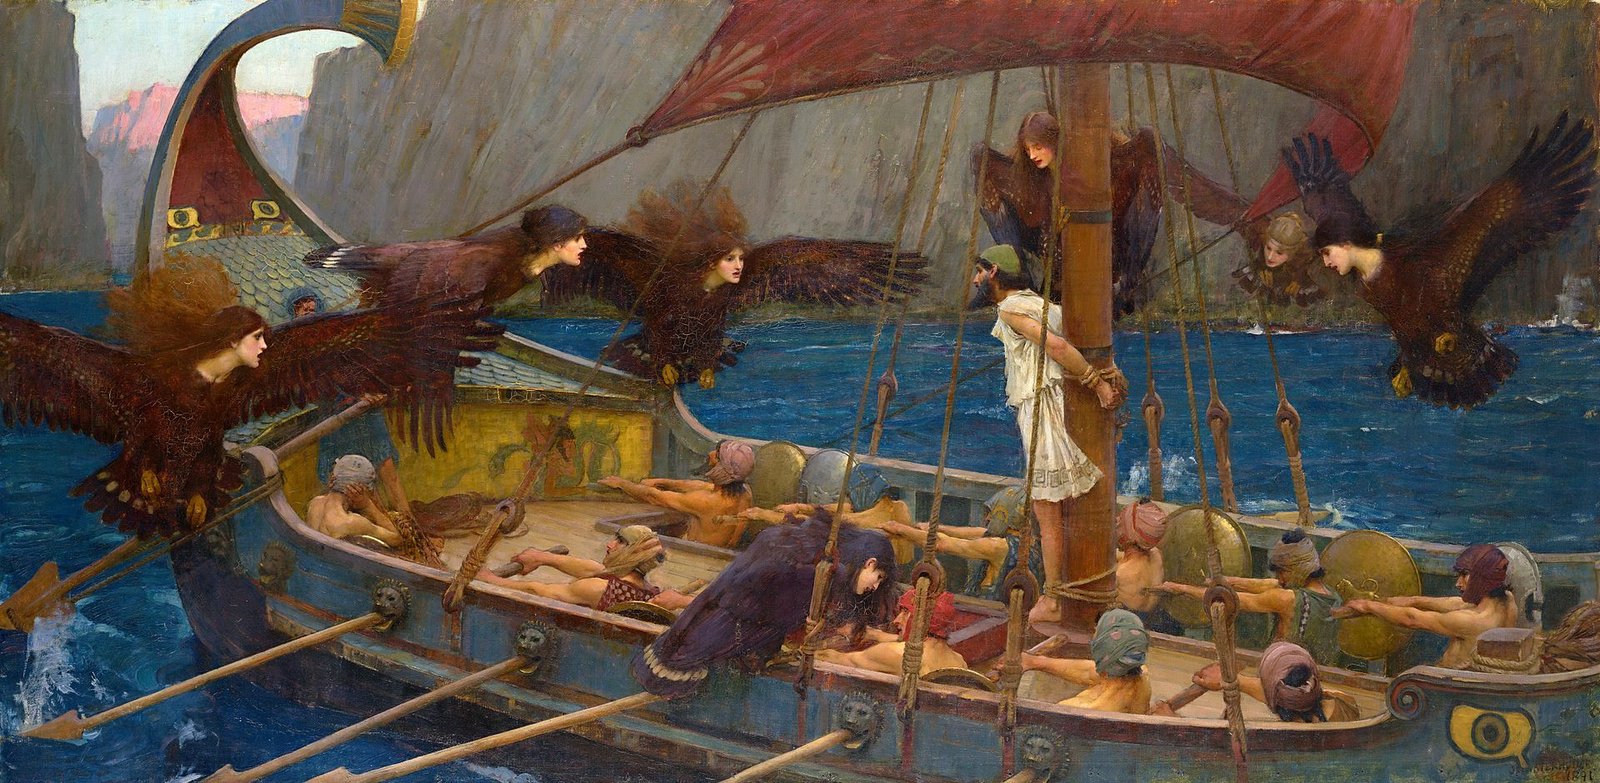 This painting represents Odysseus tied to a mast of his ship, while the syrens with the bodies of birds try to lure him into the sea.